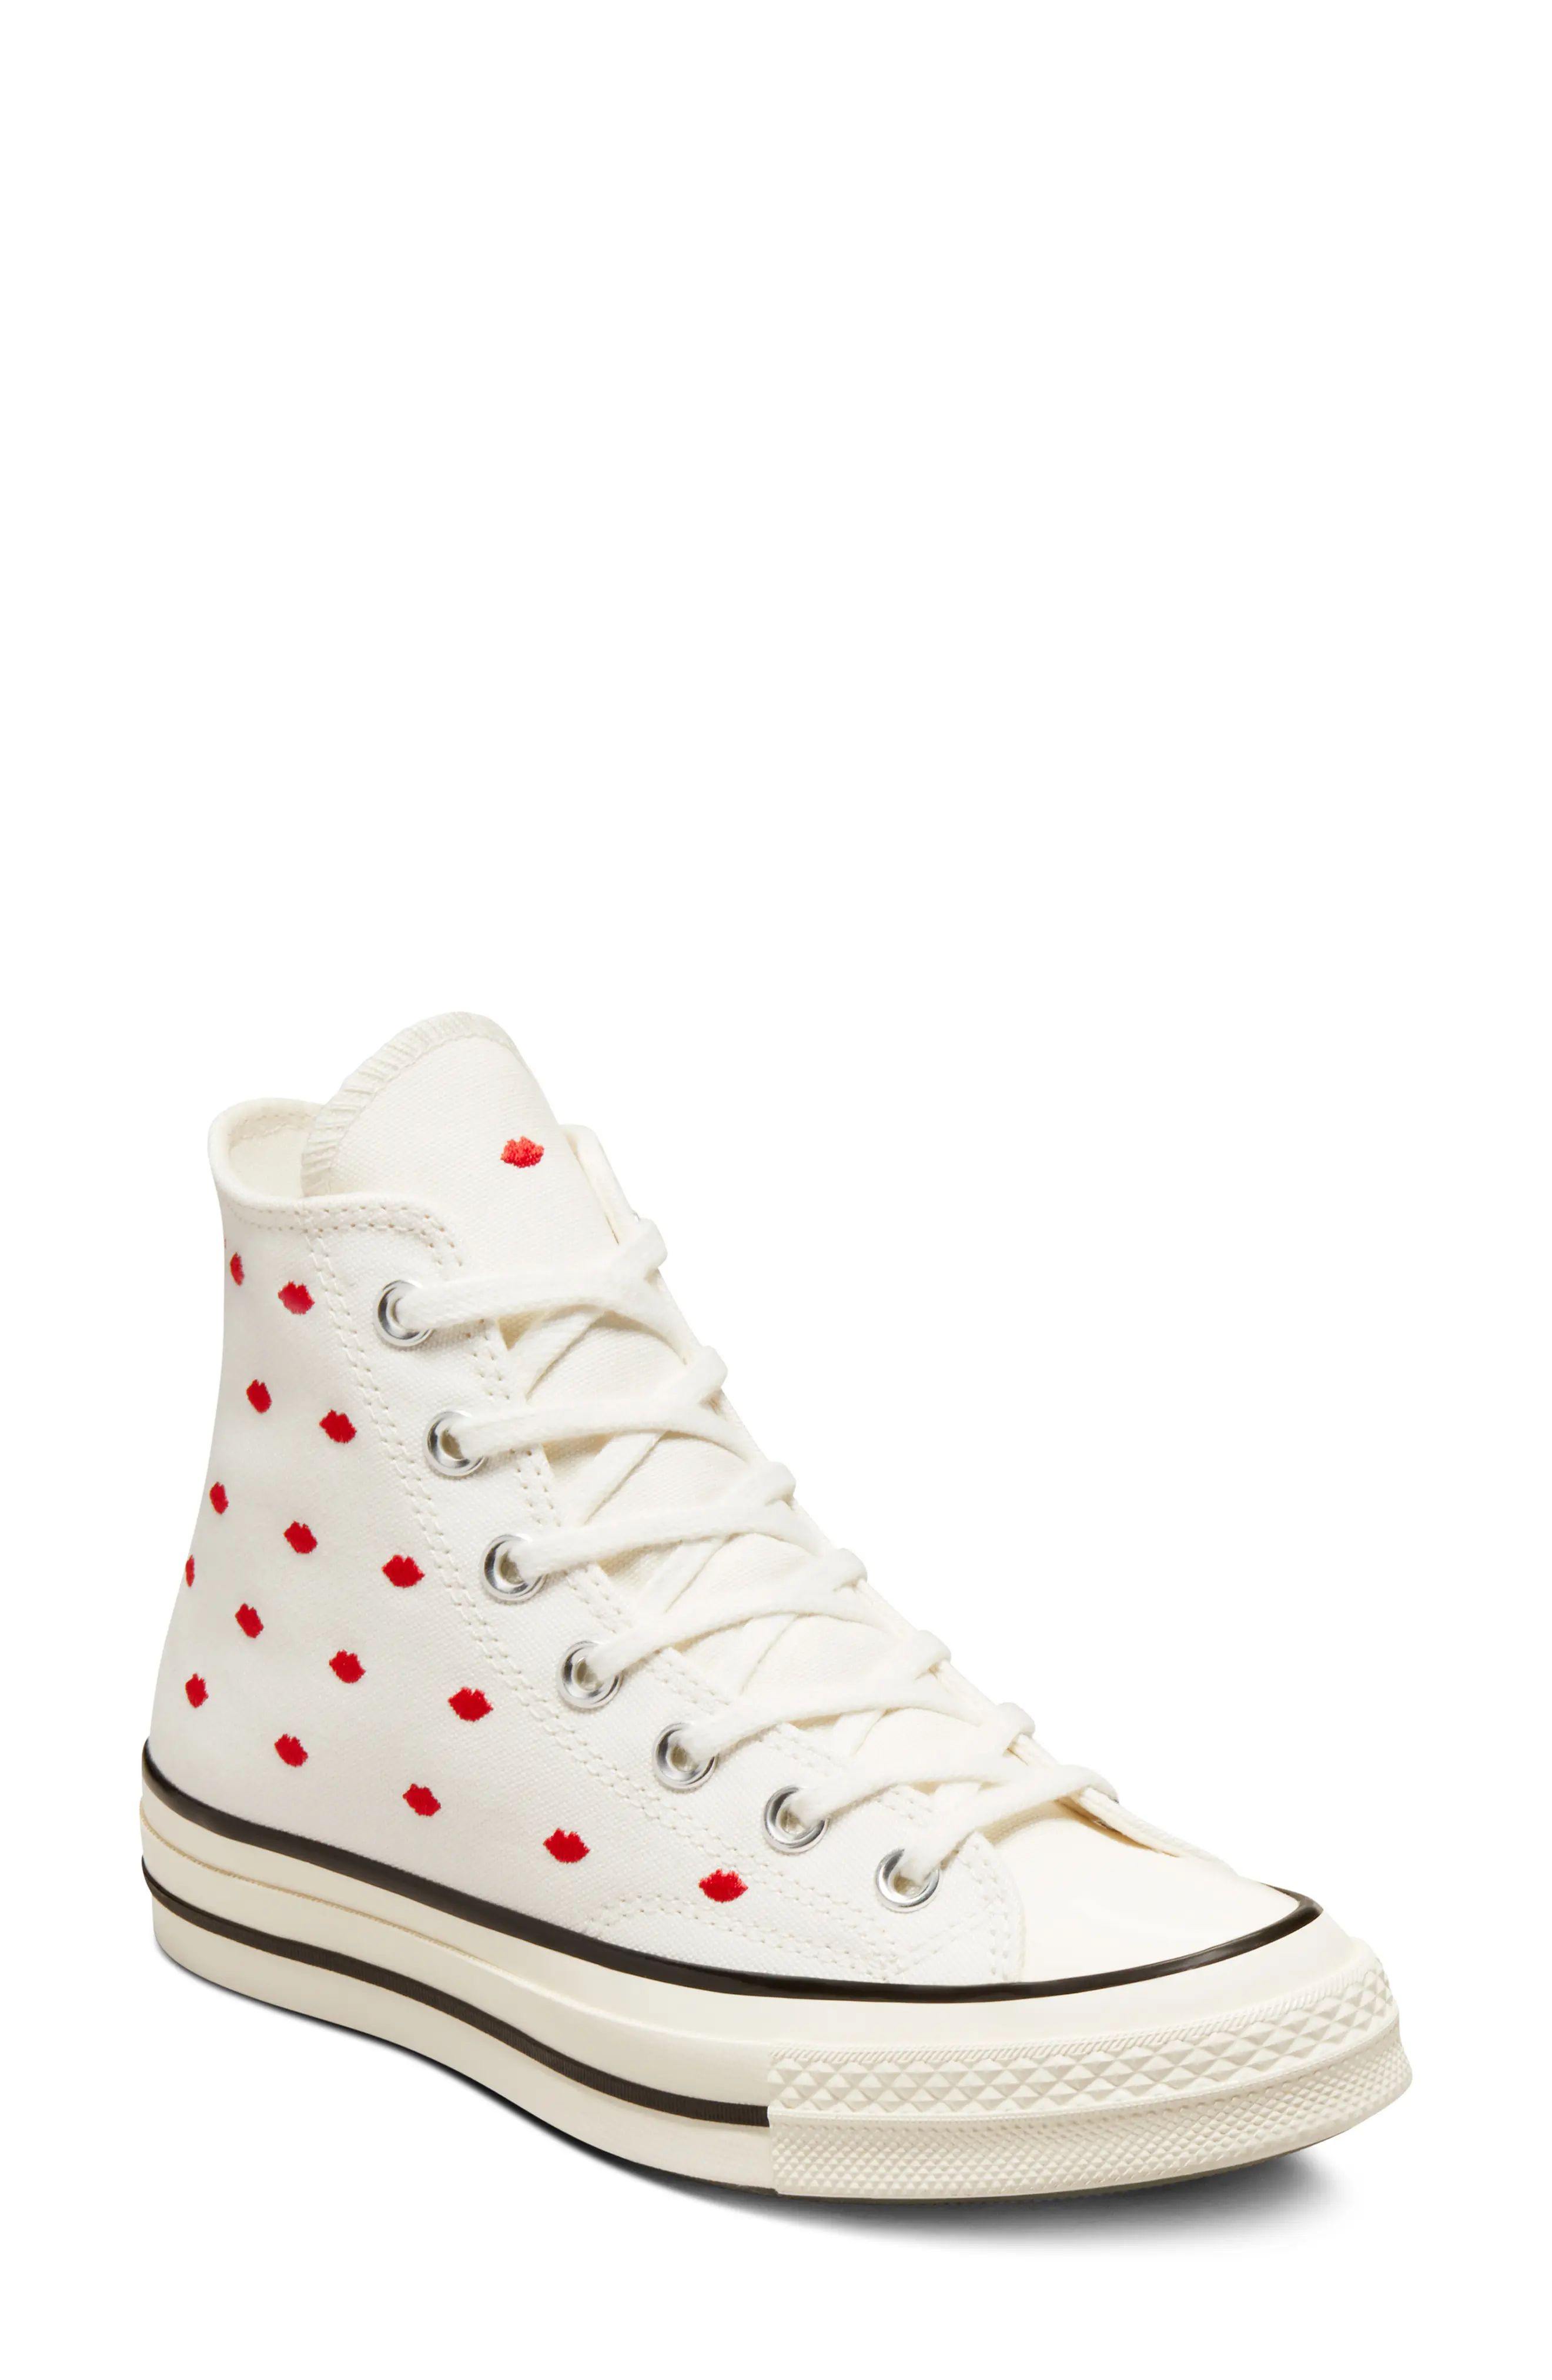 Converse Gender Inclusive Chuck 70 Hi Sneaker in White/red/egret at Nordstrom, Size 11.5 Women's | Nordstrom